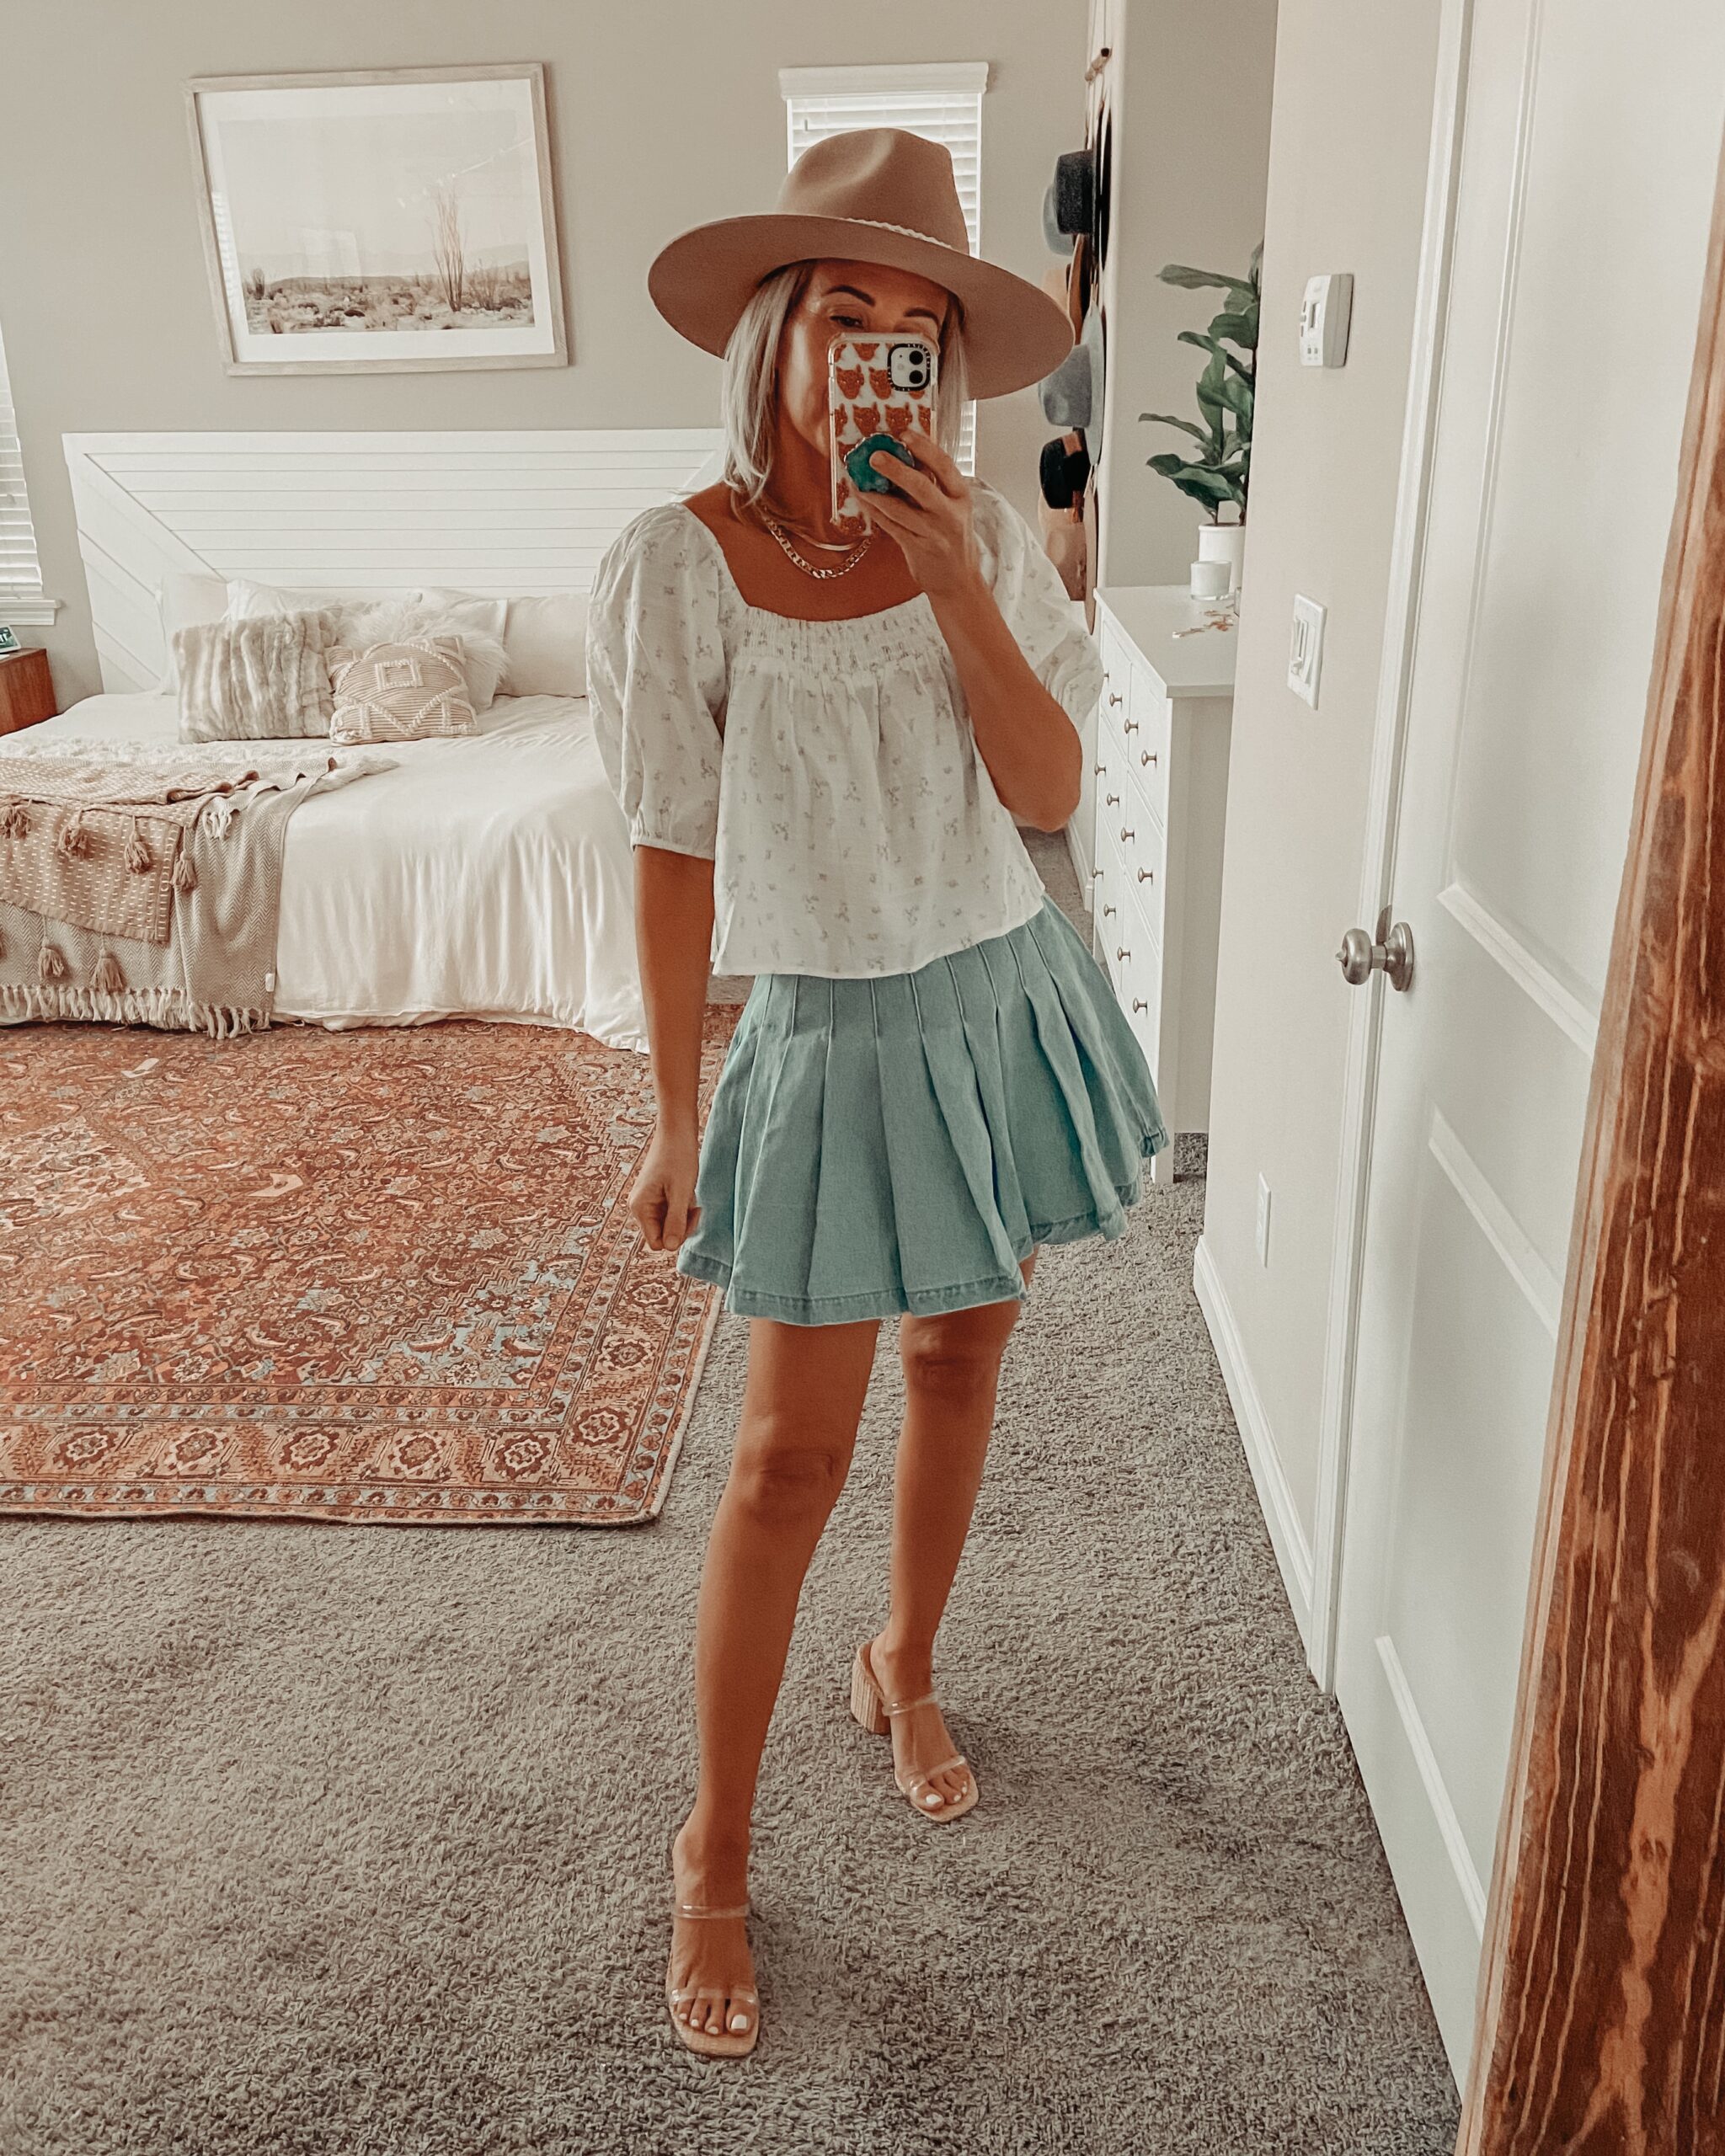 CRUSHING ON TENNIS SKIRTS- Jaclyn De Leon Style + Tennis skirts are the latest Spring trend + I'm sharing a few easy ways to style this look